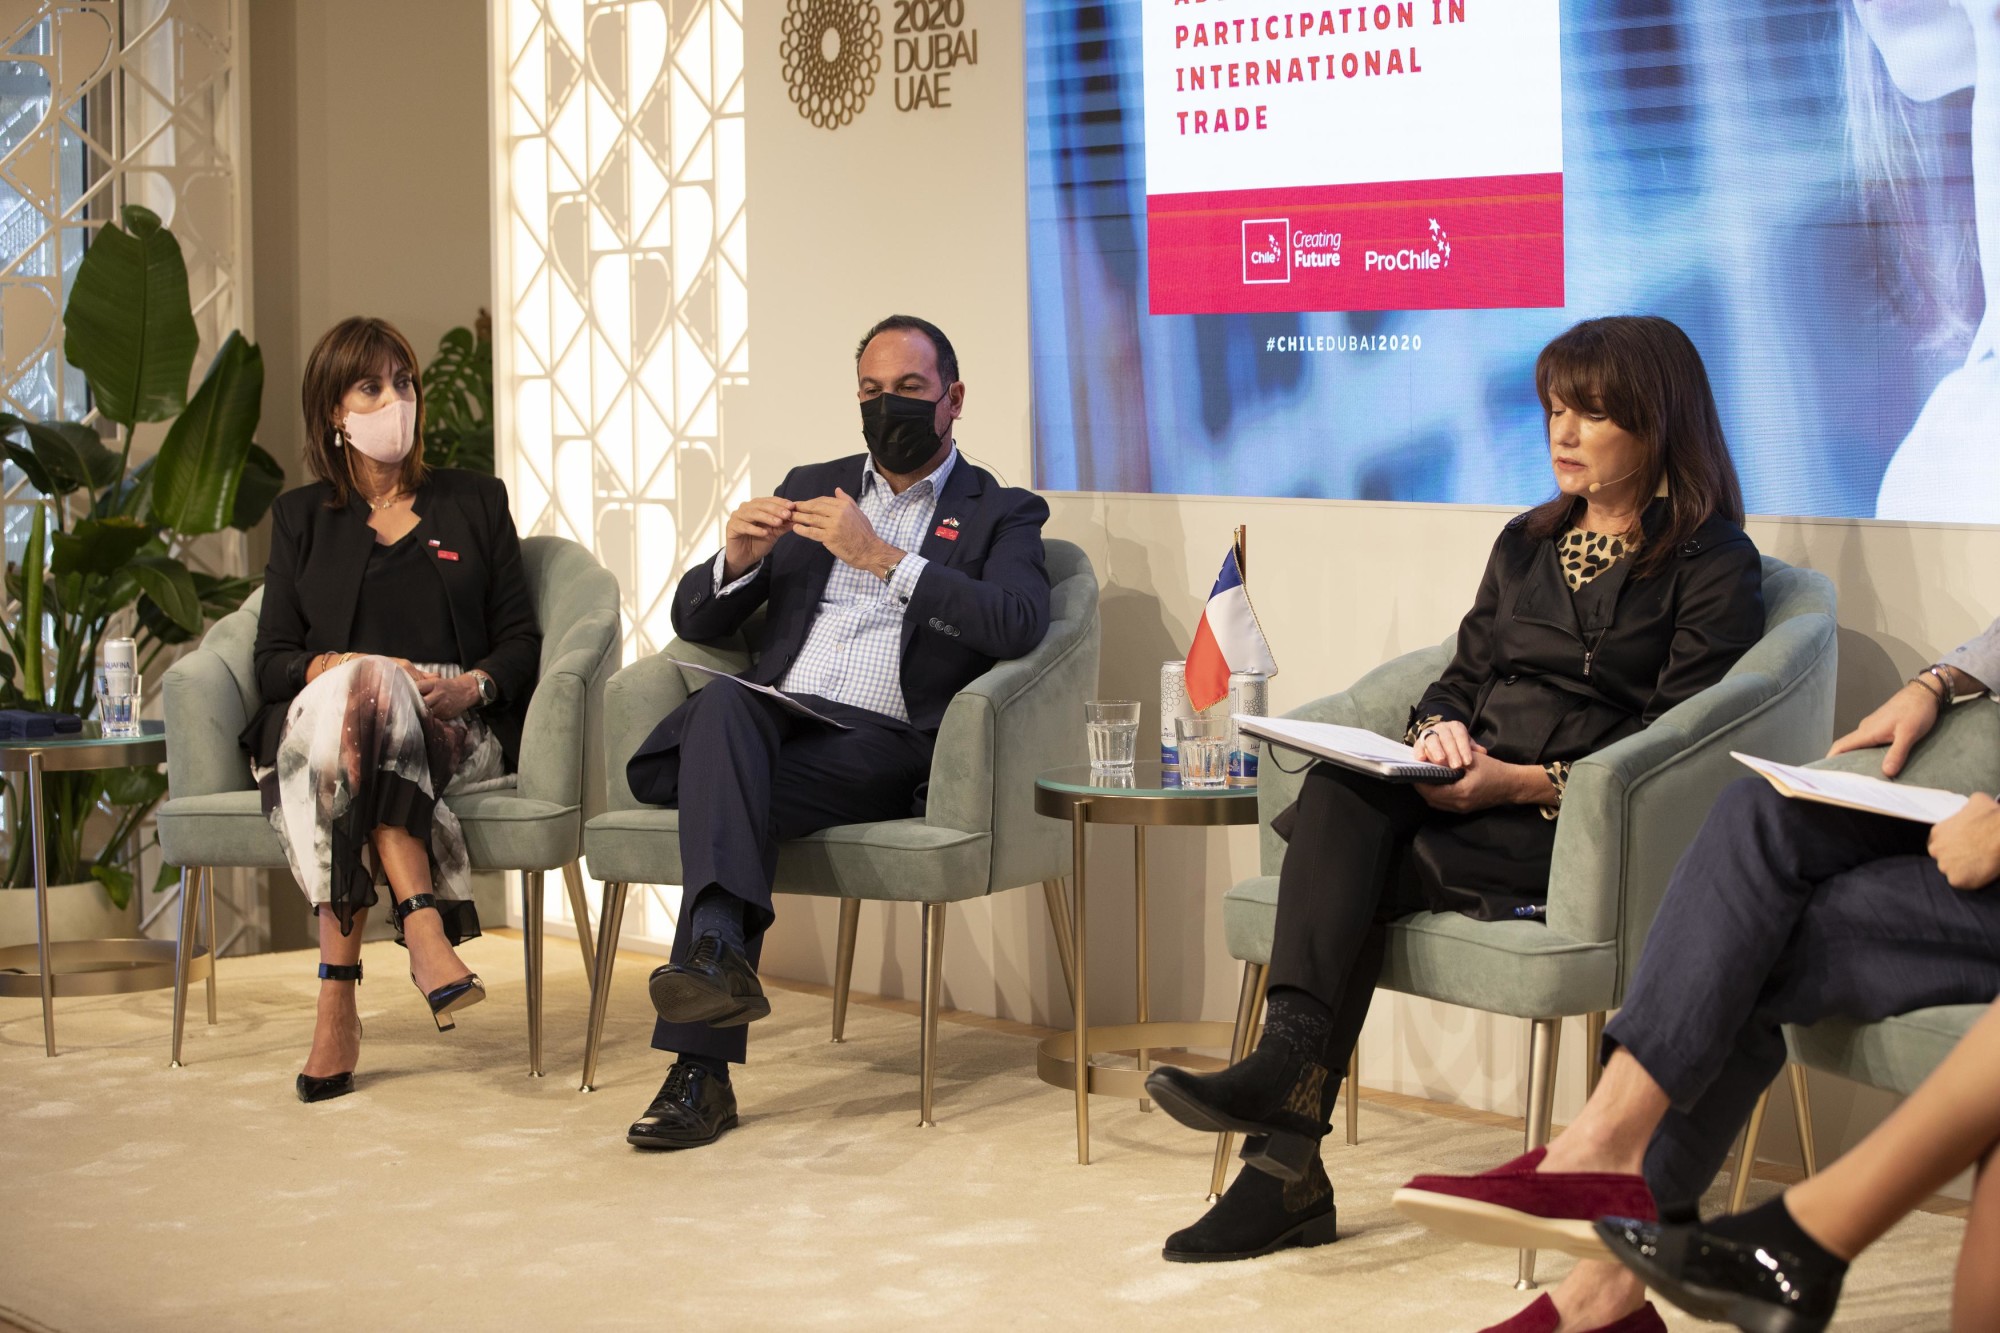 His Excellency Jorge Daccarett (C), the Ambassador of Chile in the UAE, Her Excellency Mónica Beatriz Zalaquett Said (L), Minister of Women and Gender Equality, Her Excellency Marcy Grossman (R), Ambassador at the Embassy of Canada in the U